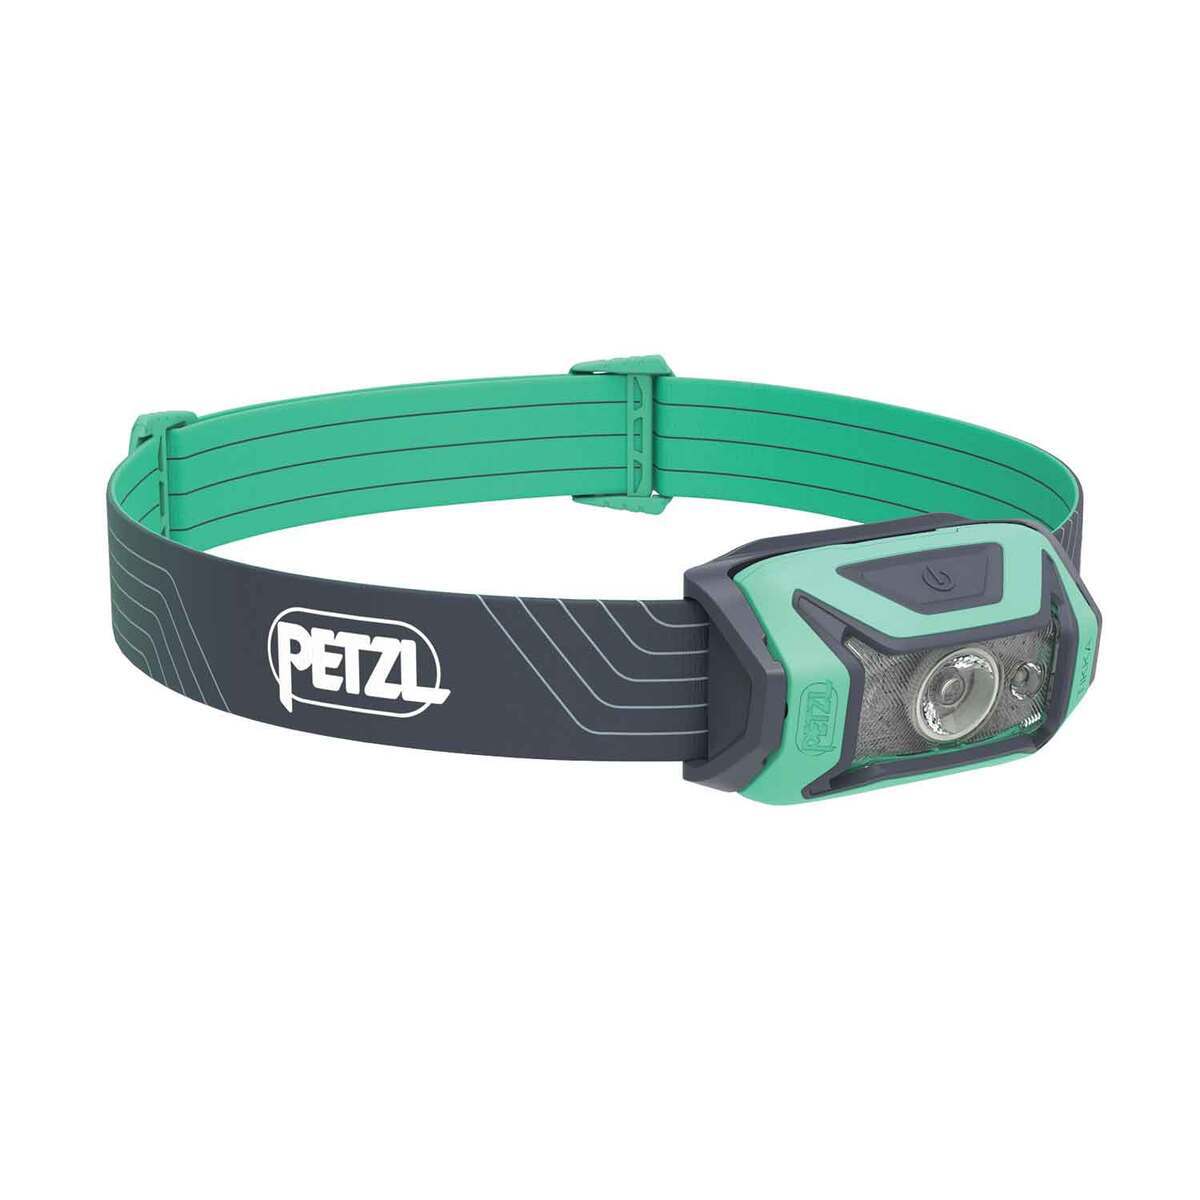 CORE, Rechargeable battery compatible with Petzl headlamps featuring the  HYBRID CONCEPT design - Petzl USA